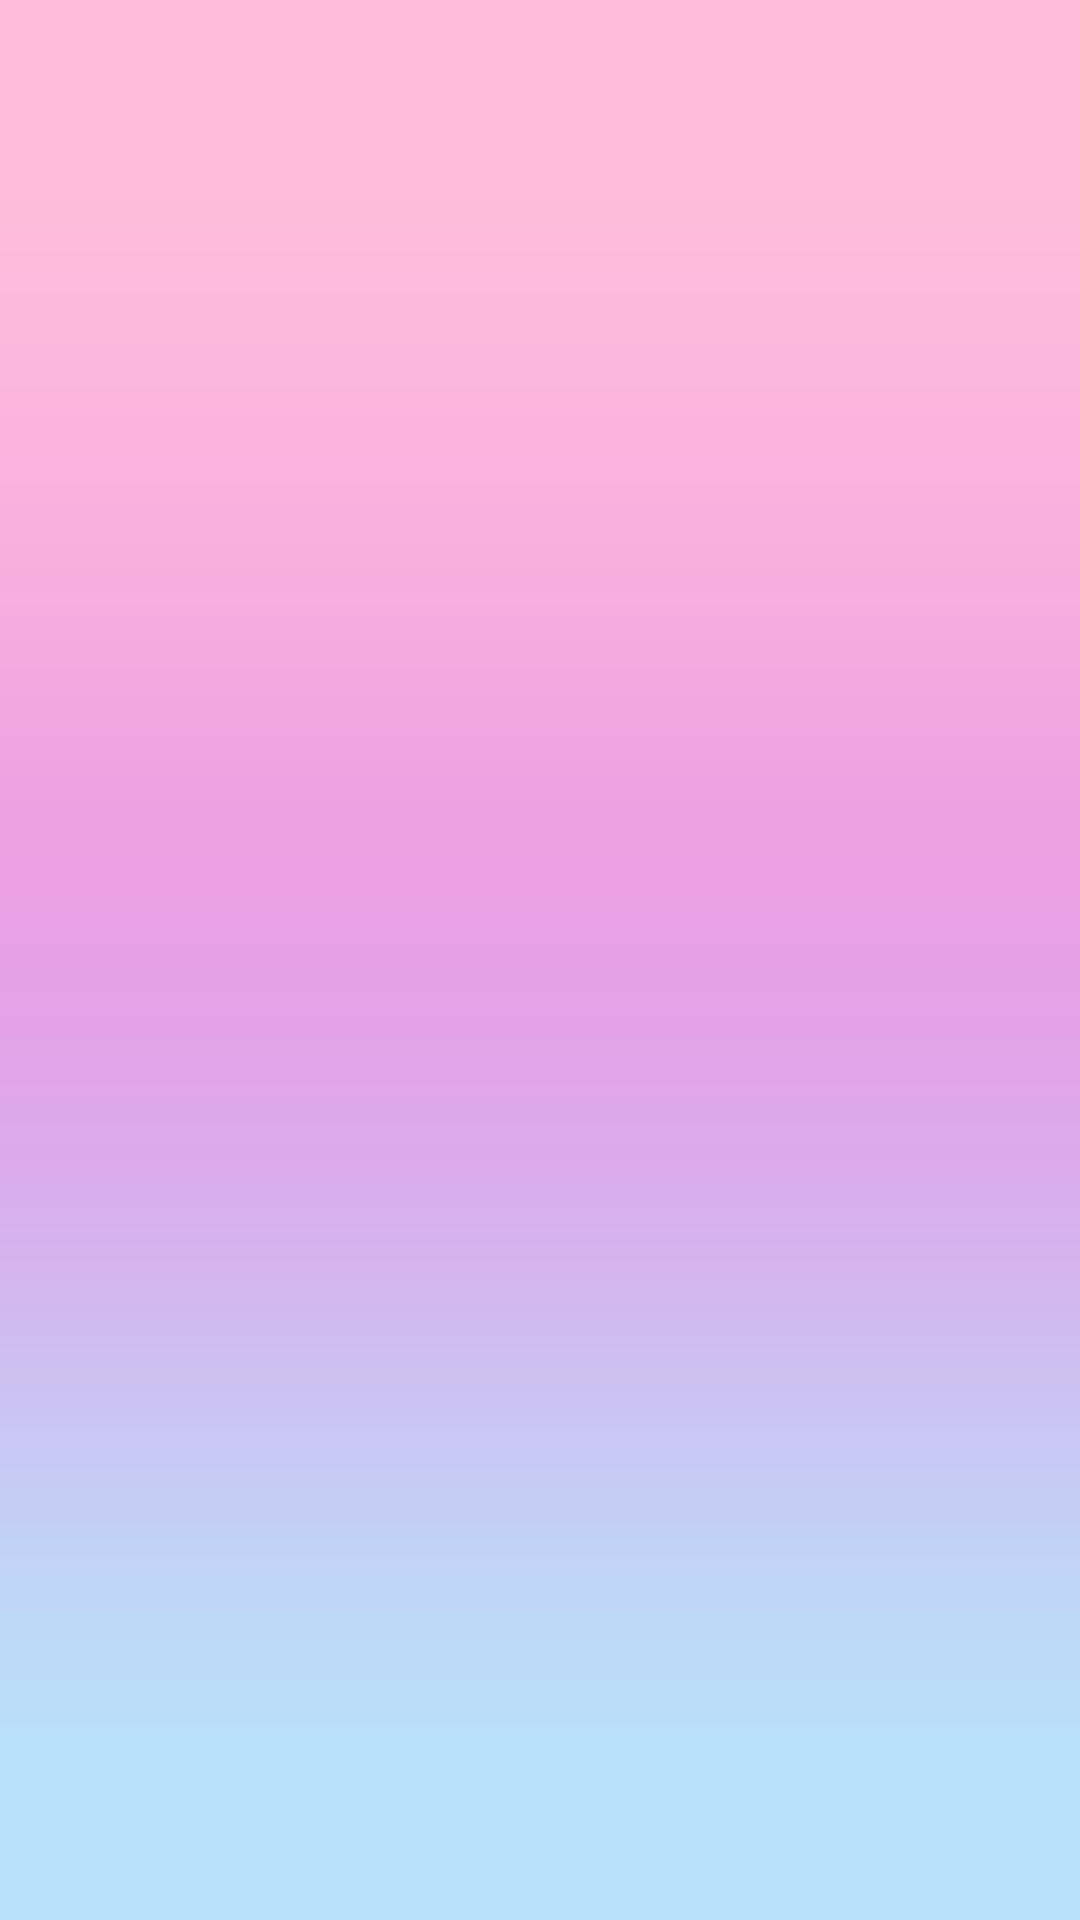 Cute Pastel Colors Abstract Design Wallpaper